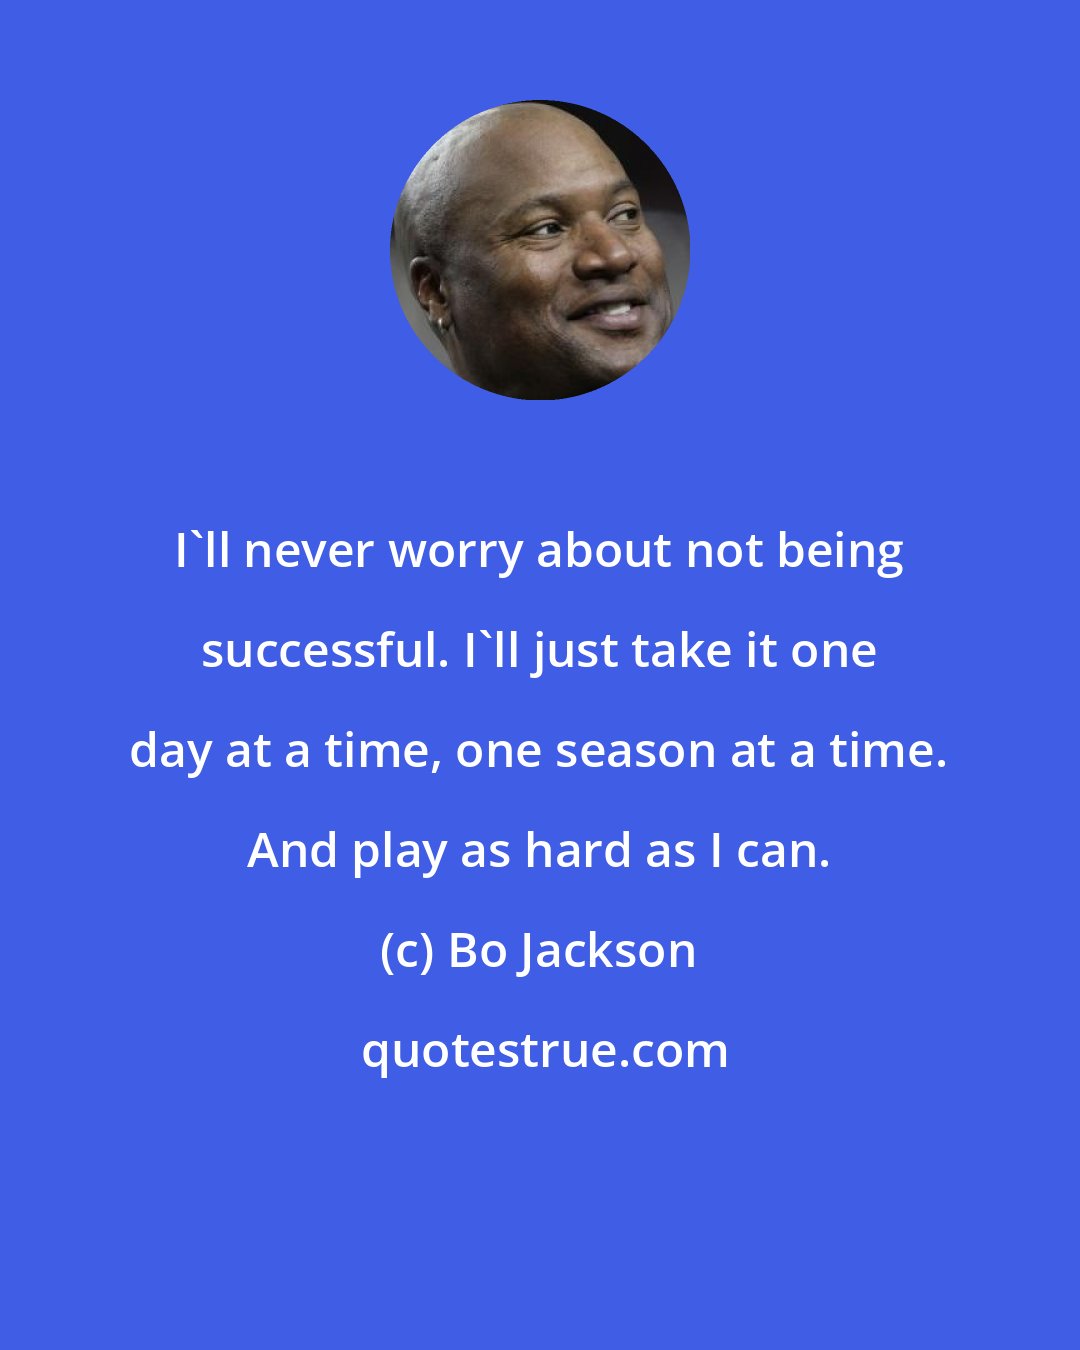 Bo Jackson: I'll never worry about not being successful. I'll just take it one day at a time, one season at a time. And play as hard as I can.